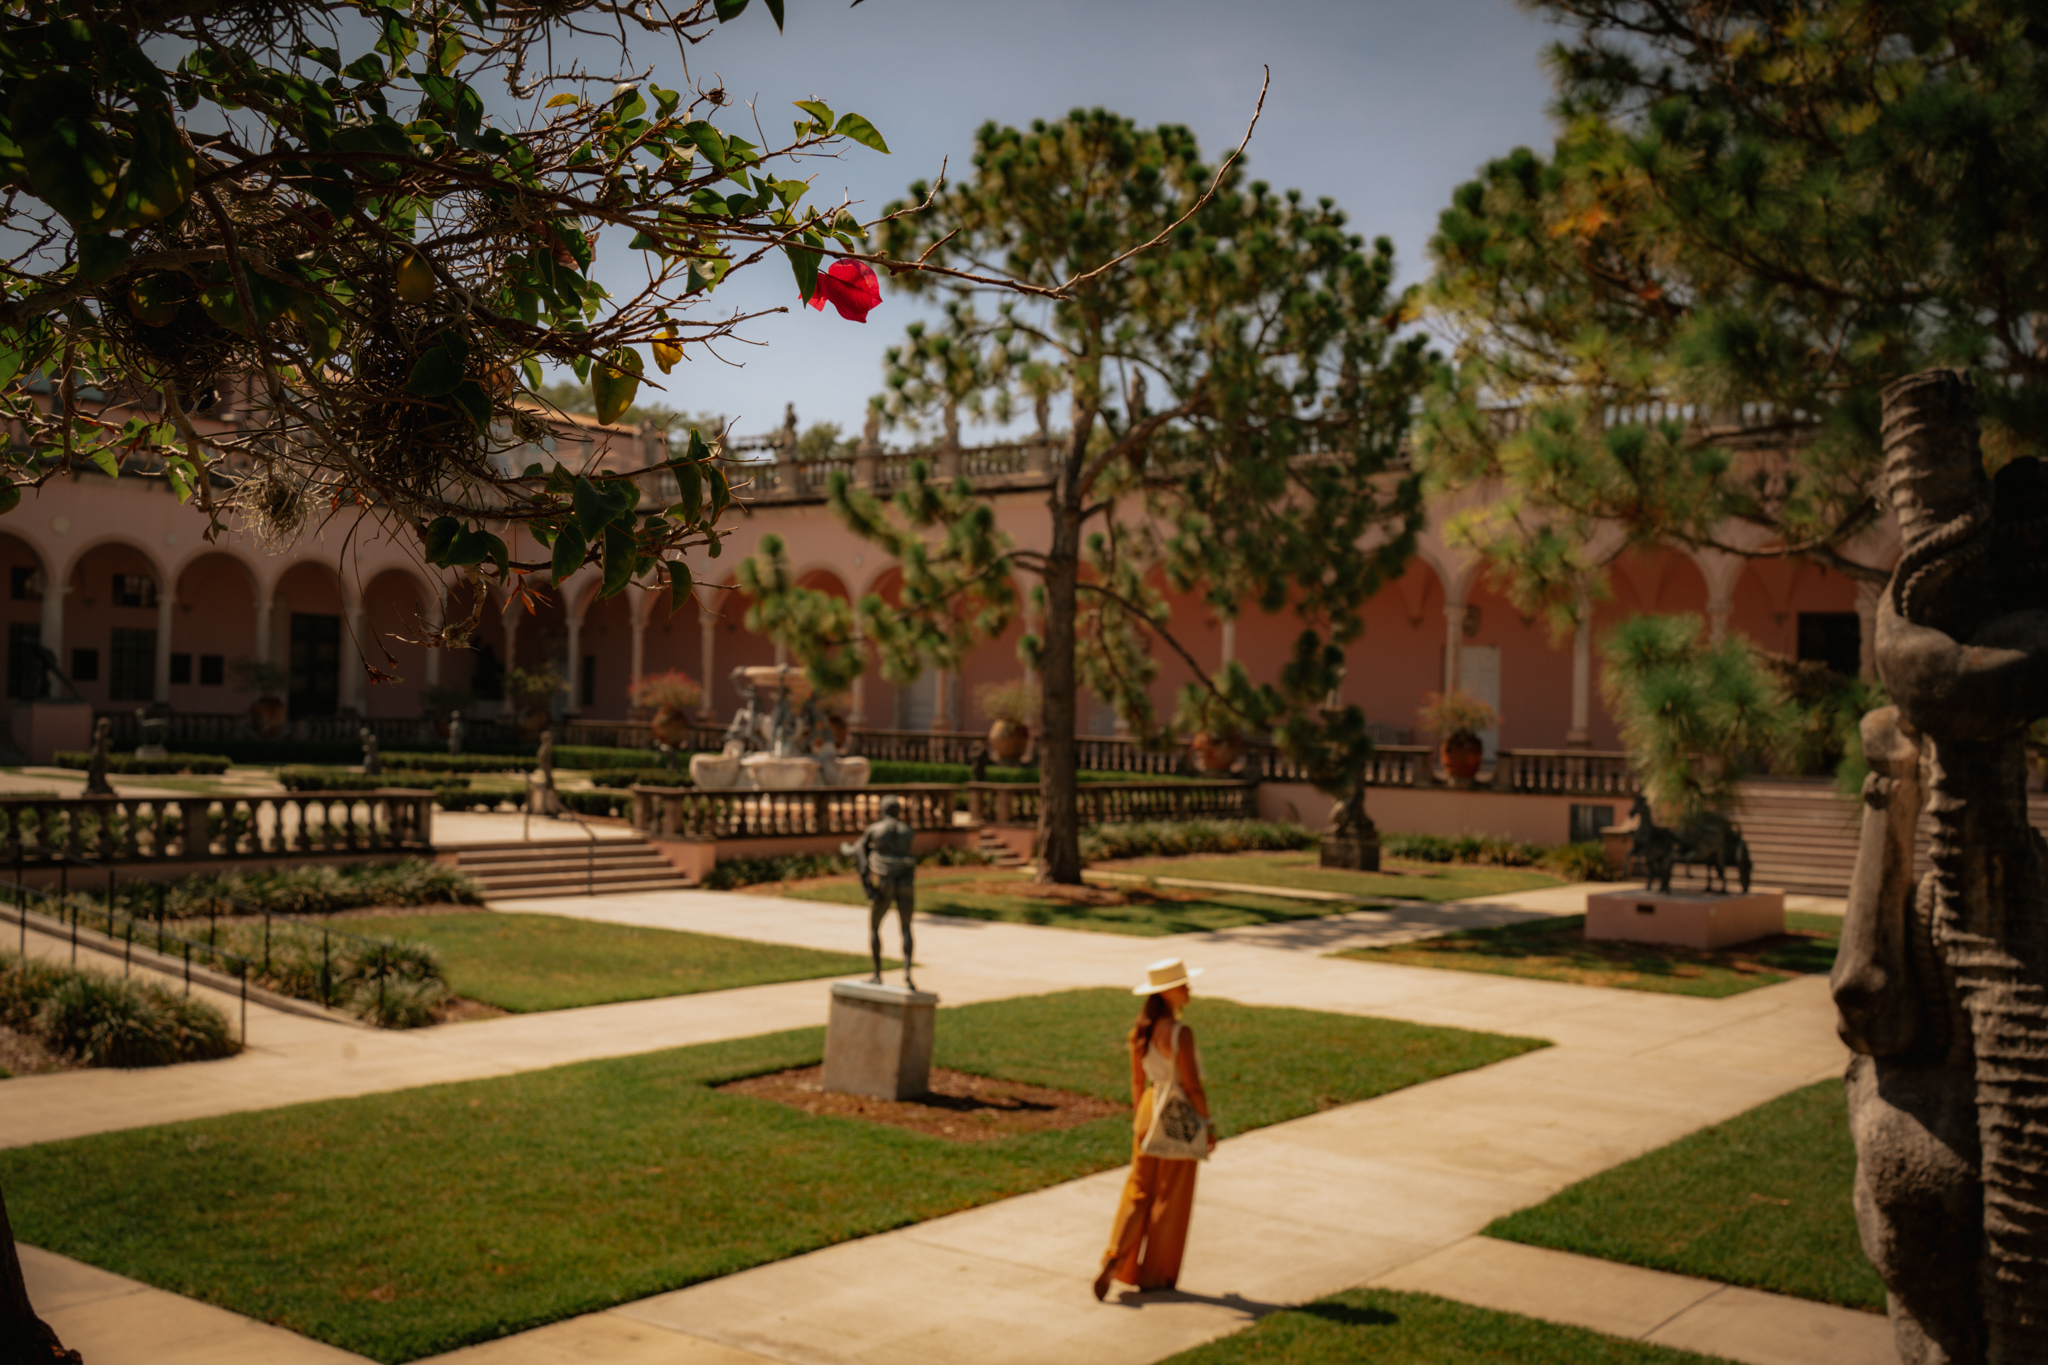 Florentine gardens as the RIngling Museum